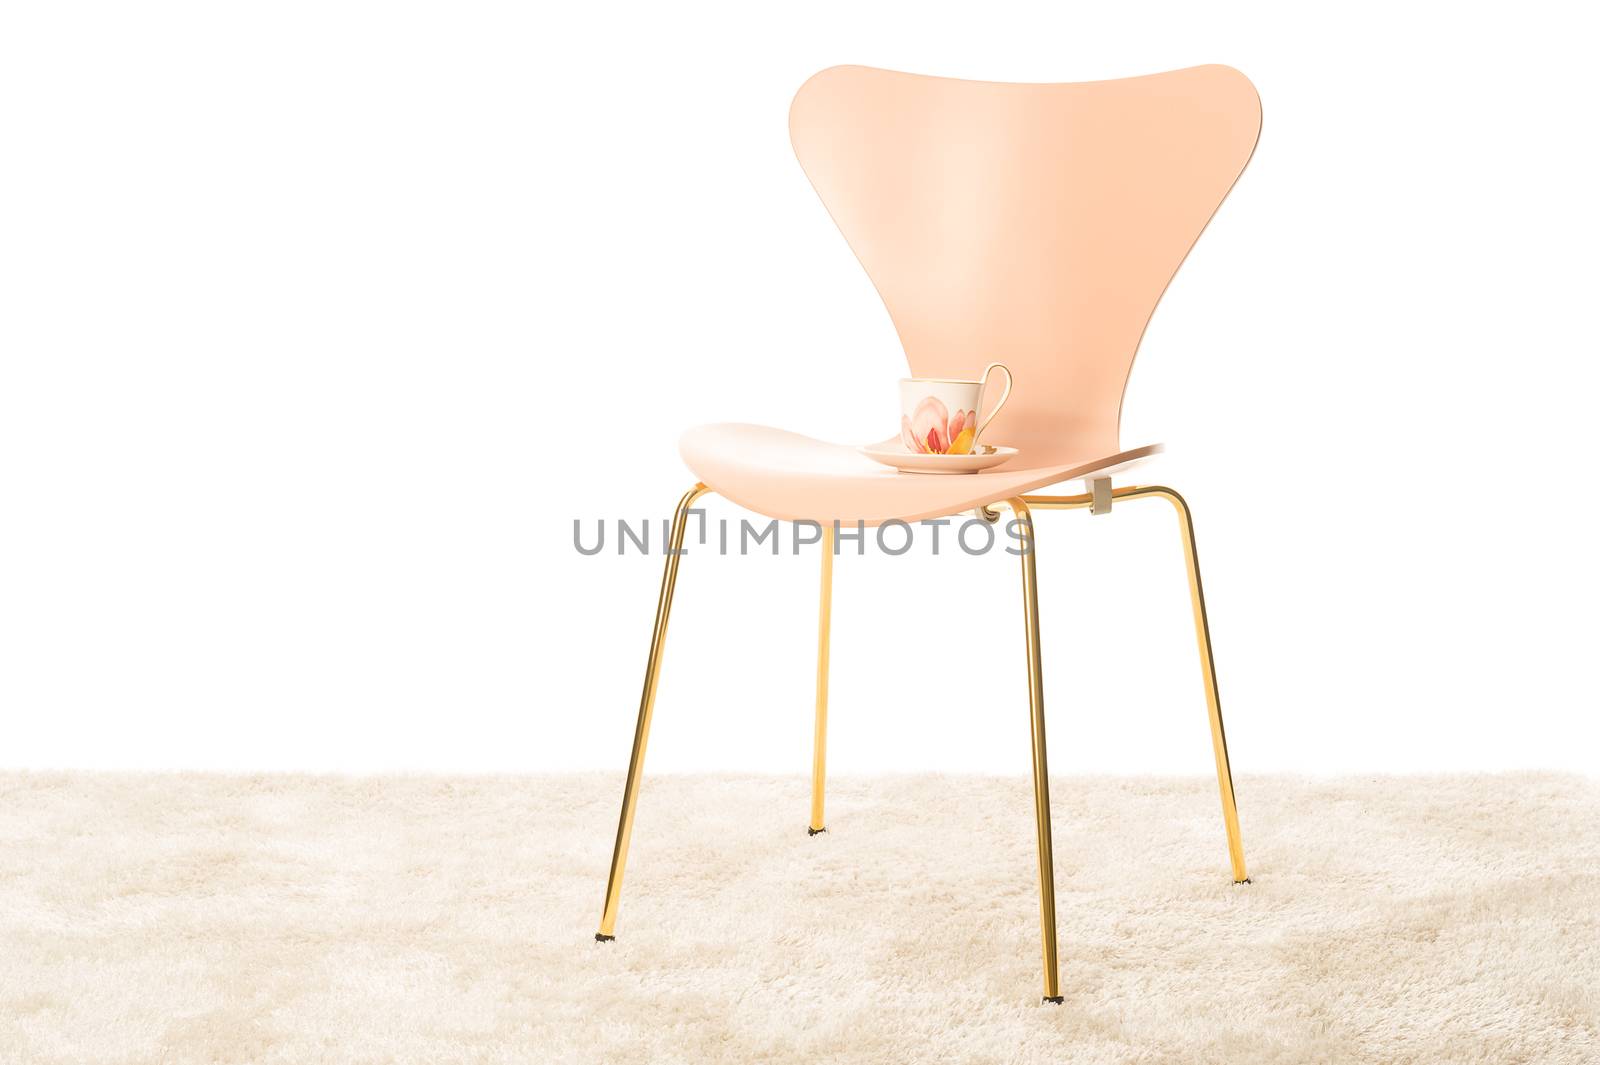 Stylish moulded modern chair with metal legs and a porcelain teacup standing on the vacant seat in a room interior with a white wall and copyspace